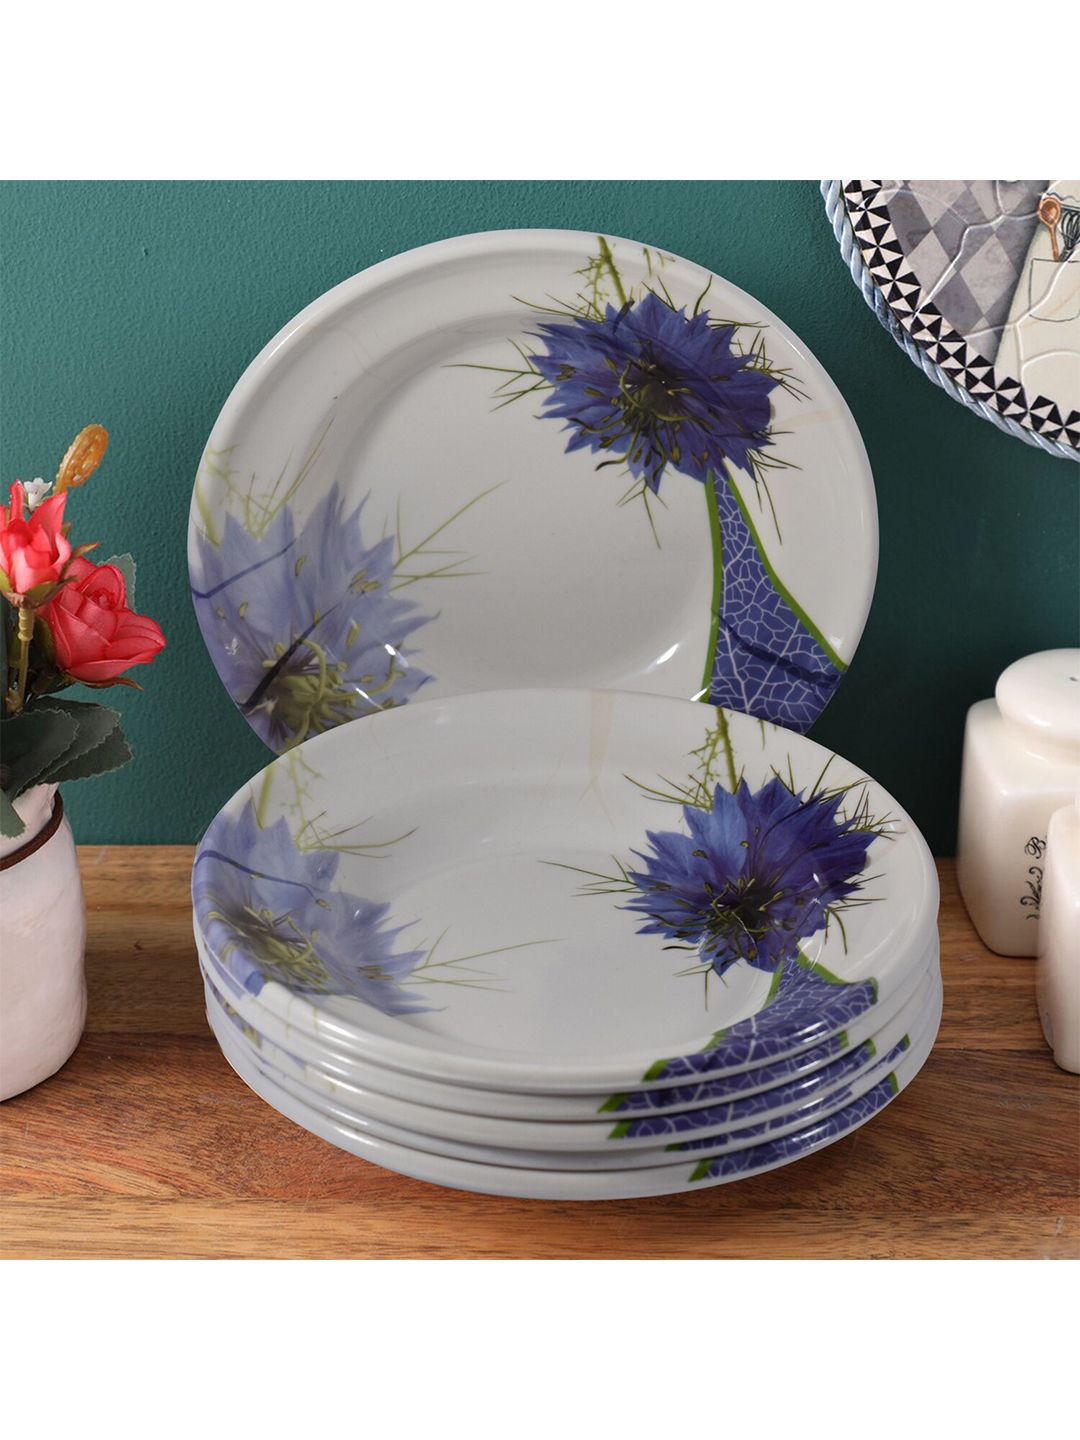 Gallery99 White & Blue Set 6 Floral Printed Melamine Glossy Serving Plates Price in India